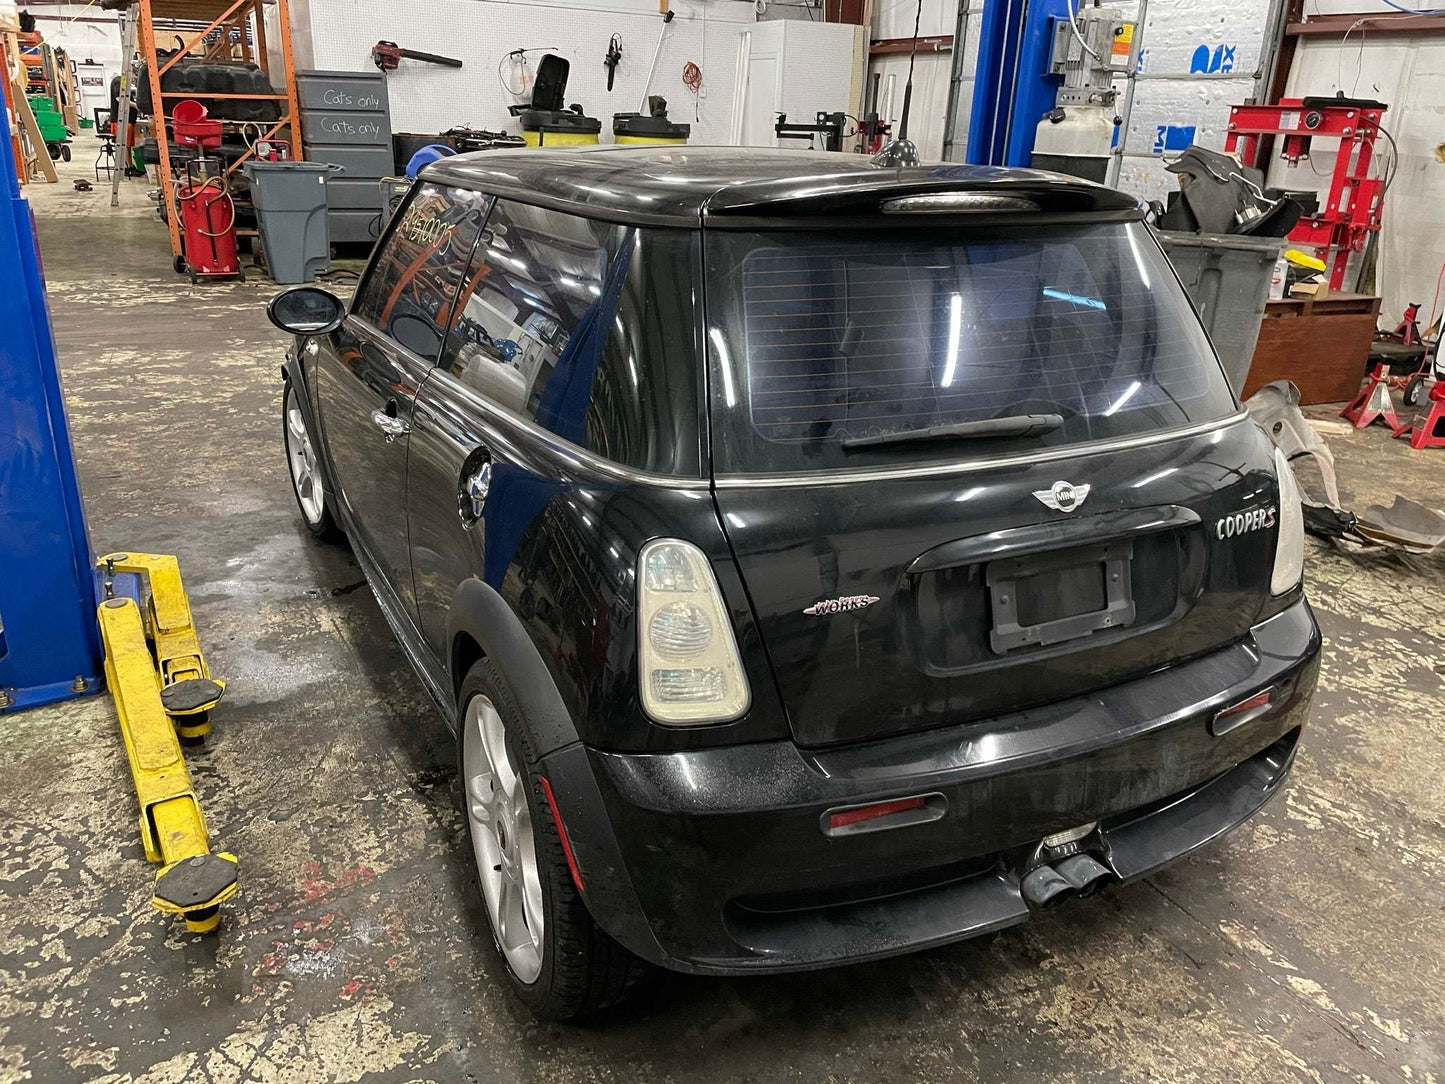 2004 MINI Cooper Hatchback S with JCW Tuning Kit, New Parts Car (March 2021) Stk # 228